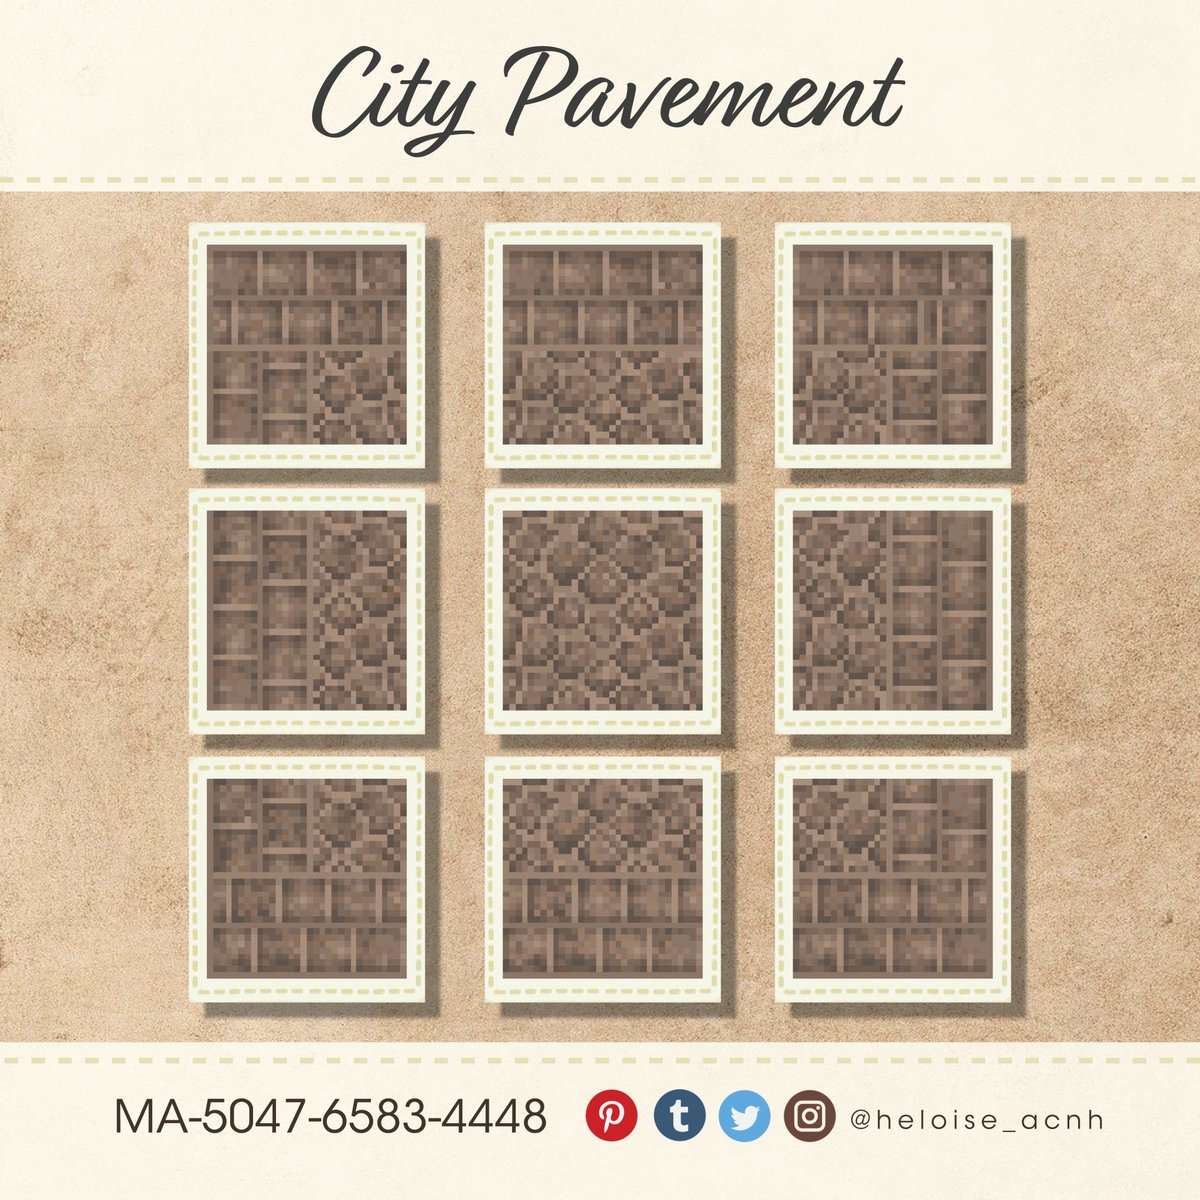 New pattern ! City pavement for your island.😊

#ACNHDesign #ACNH #ACNHDesigns #acnhcodes #ACNHpath #acnhpattern #ACNHcitycore #AnimalCrossing #AnimalCrossingNewHorizons #acnhnintendo #NintendoSwitch #acnhpavement #acnhcobblestone